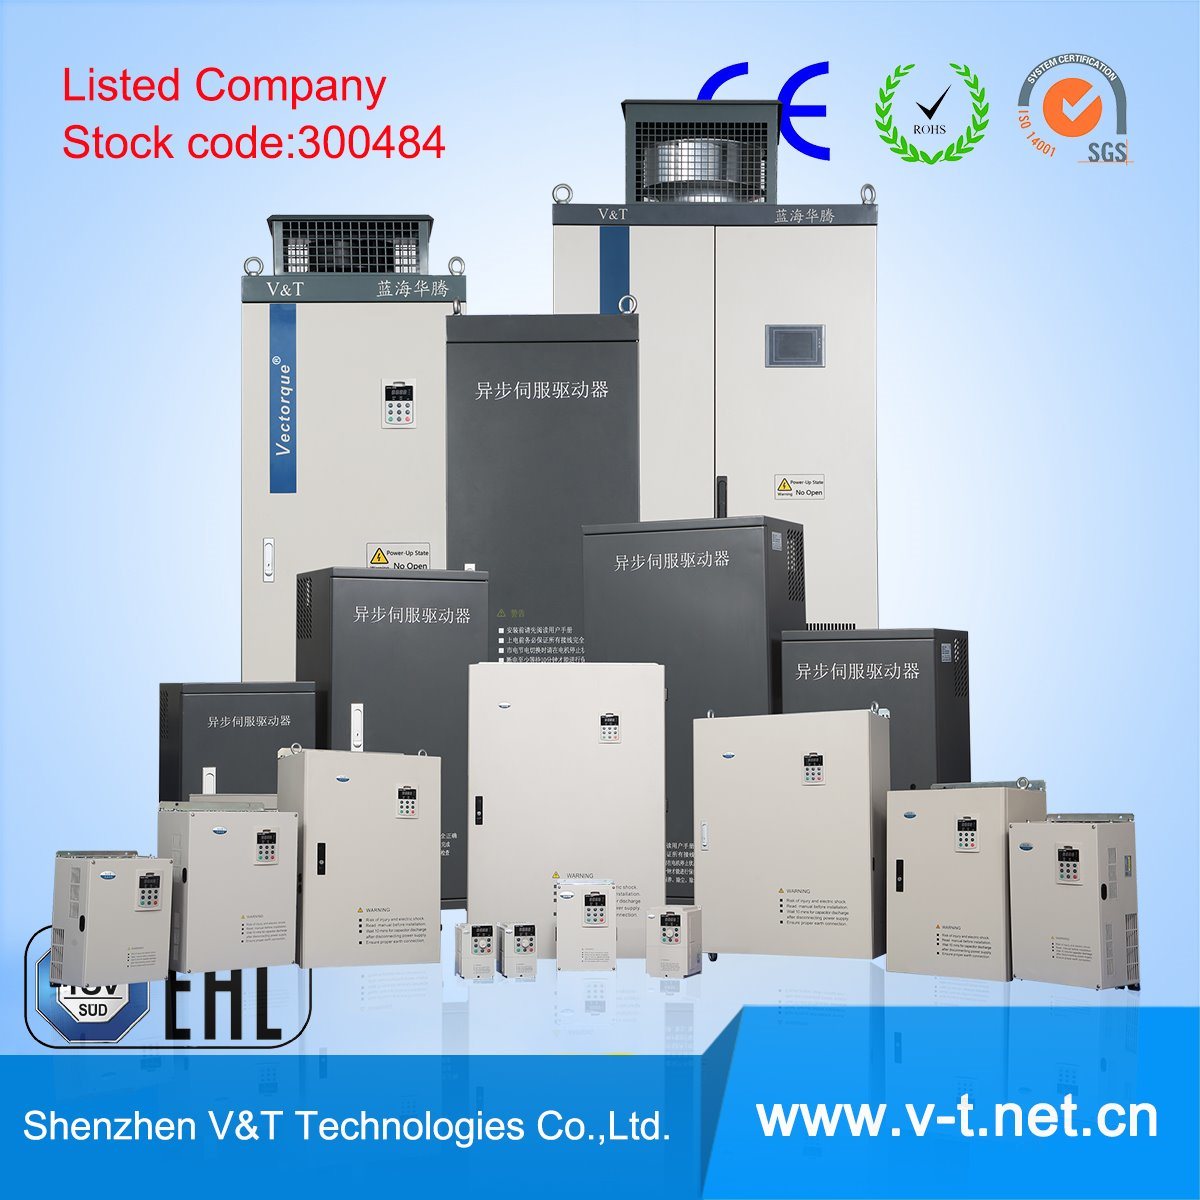 Frequency Converters AC Drive Series V&T -China's Widest Range 0.4kw-3000kw